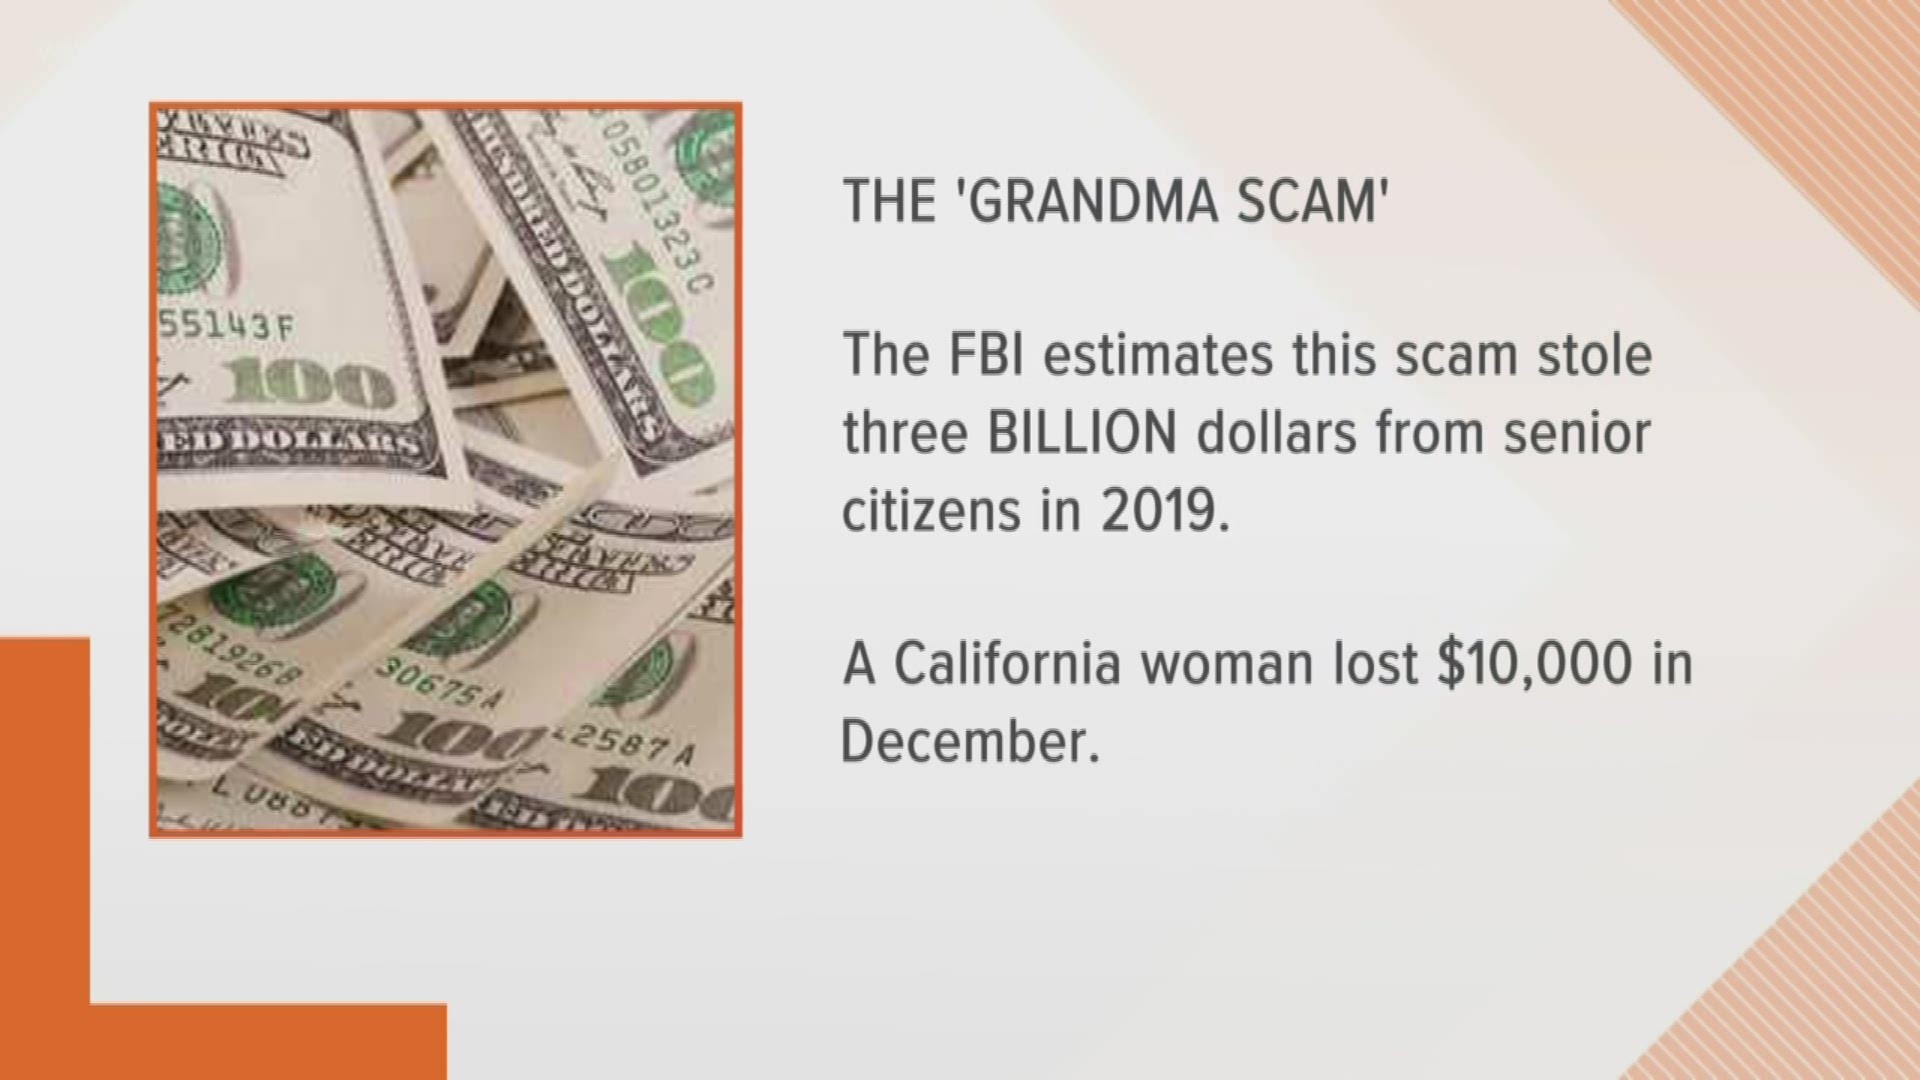 There's always someone looking to take money that doesn't belong to them. Heads up seniors: the BBB says "The Grandma Scam" is returning with a vengeance.